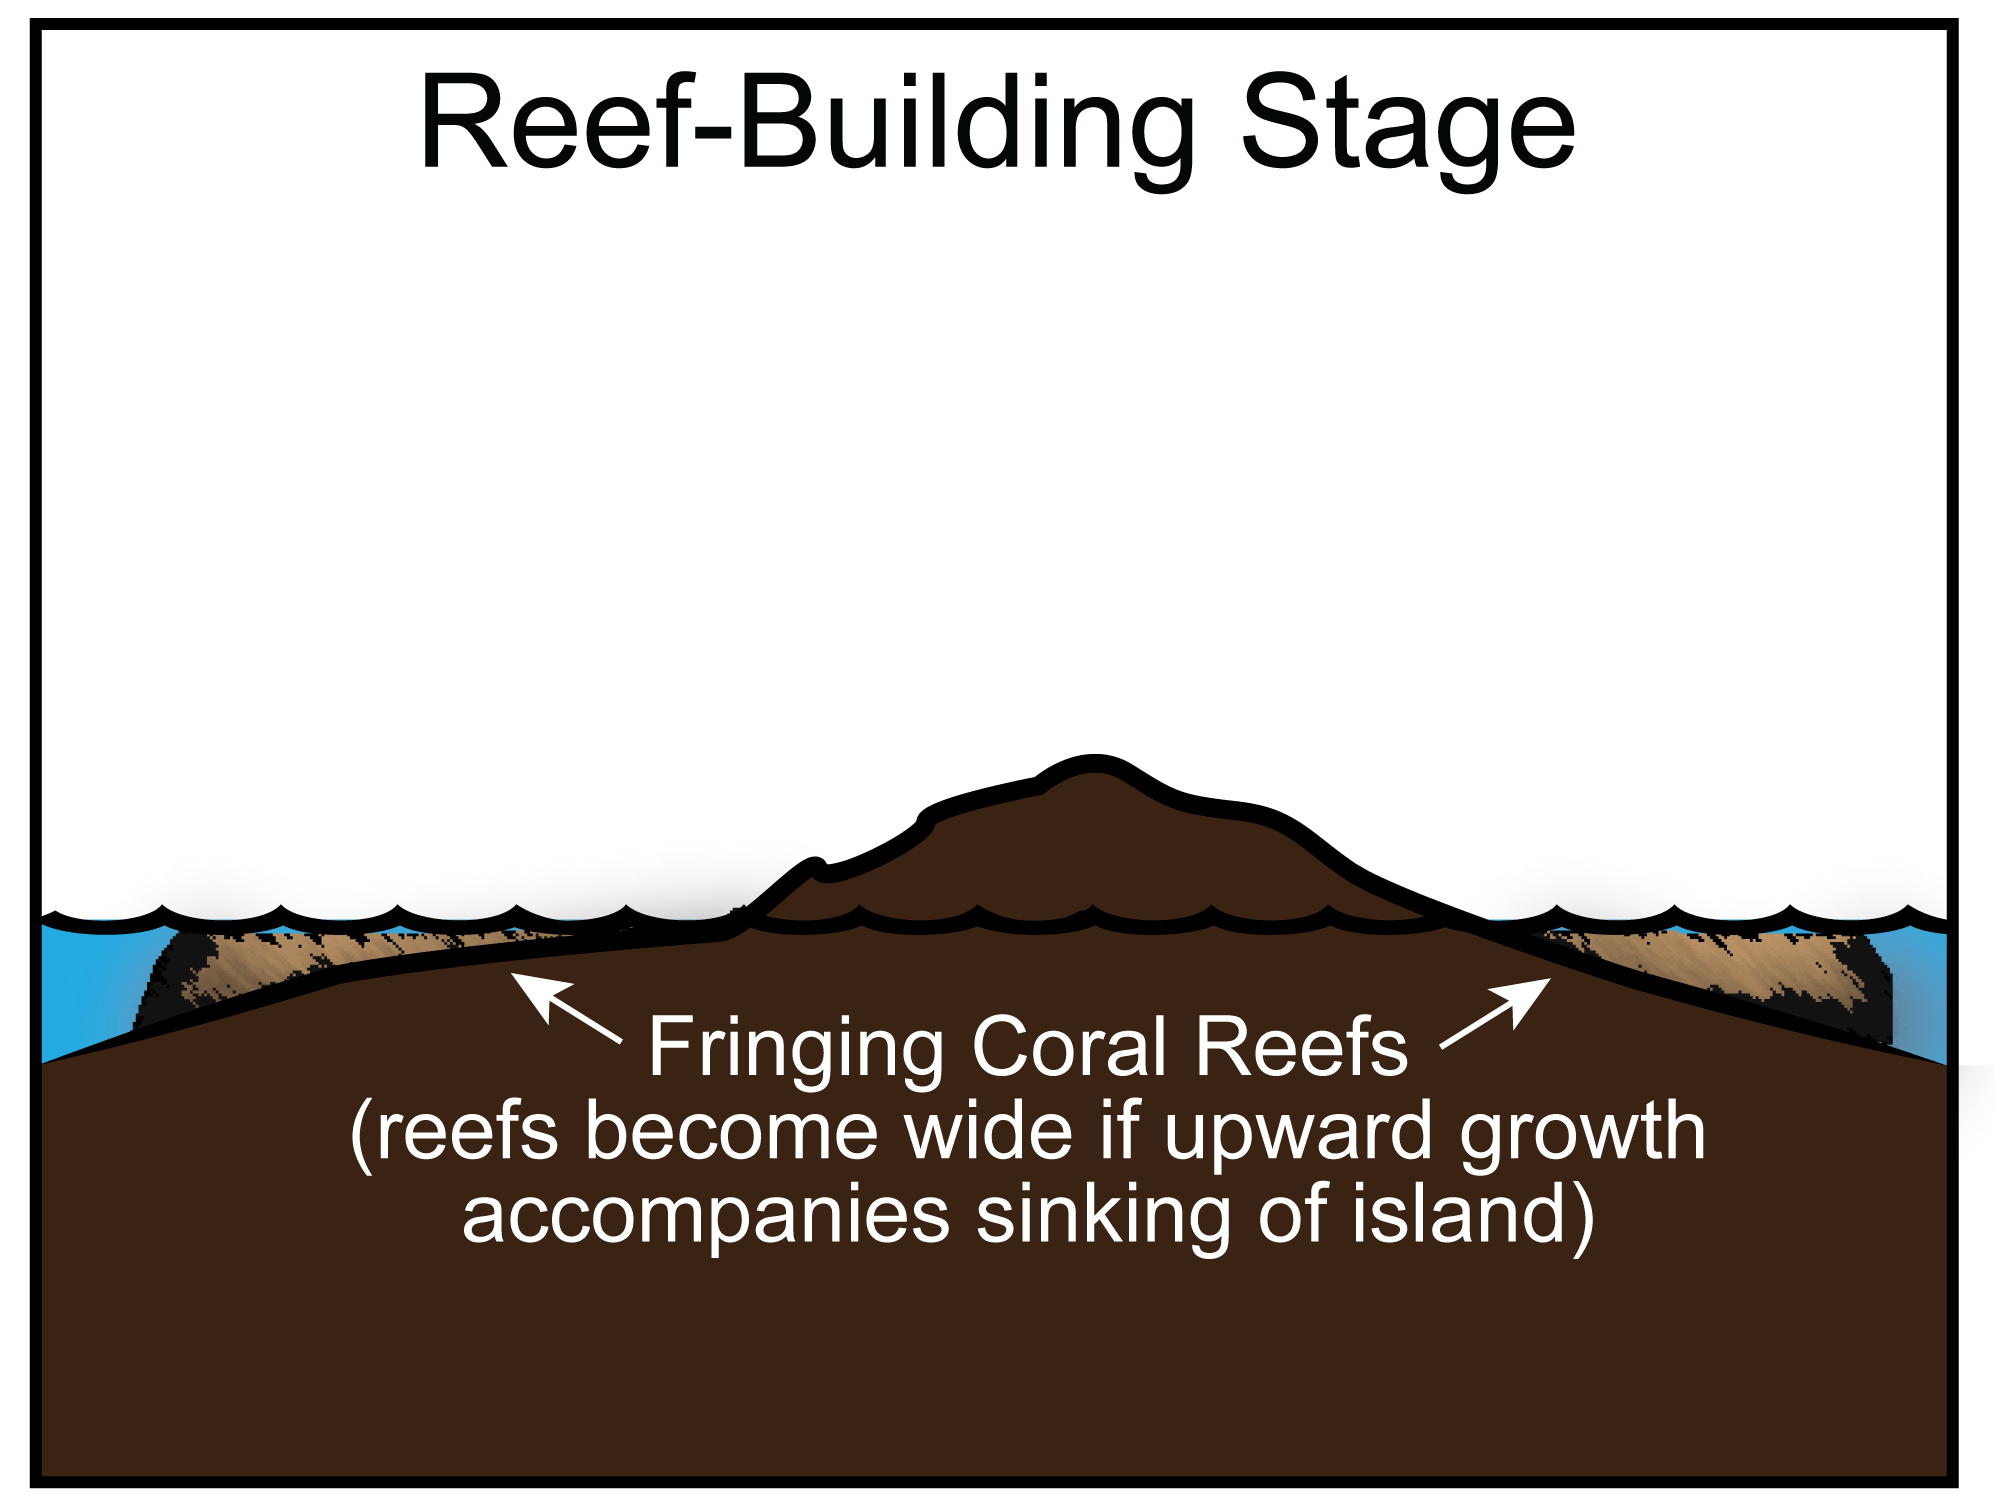 Diagram of the reef-building stage of the volcanic island life cycle. In this image, the volcano is even more heavily eroded with shallow underwater slopes flanking the part of the island that is still above water. Wide coral now occur on its submerged slopes.